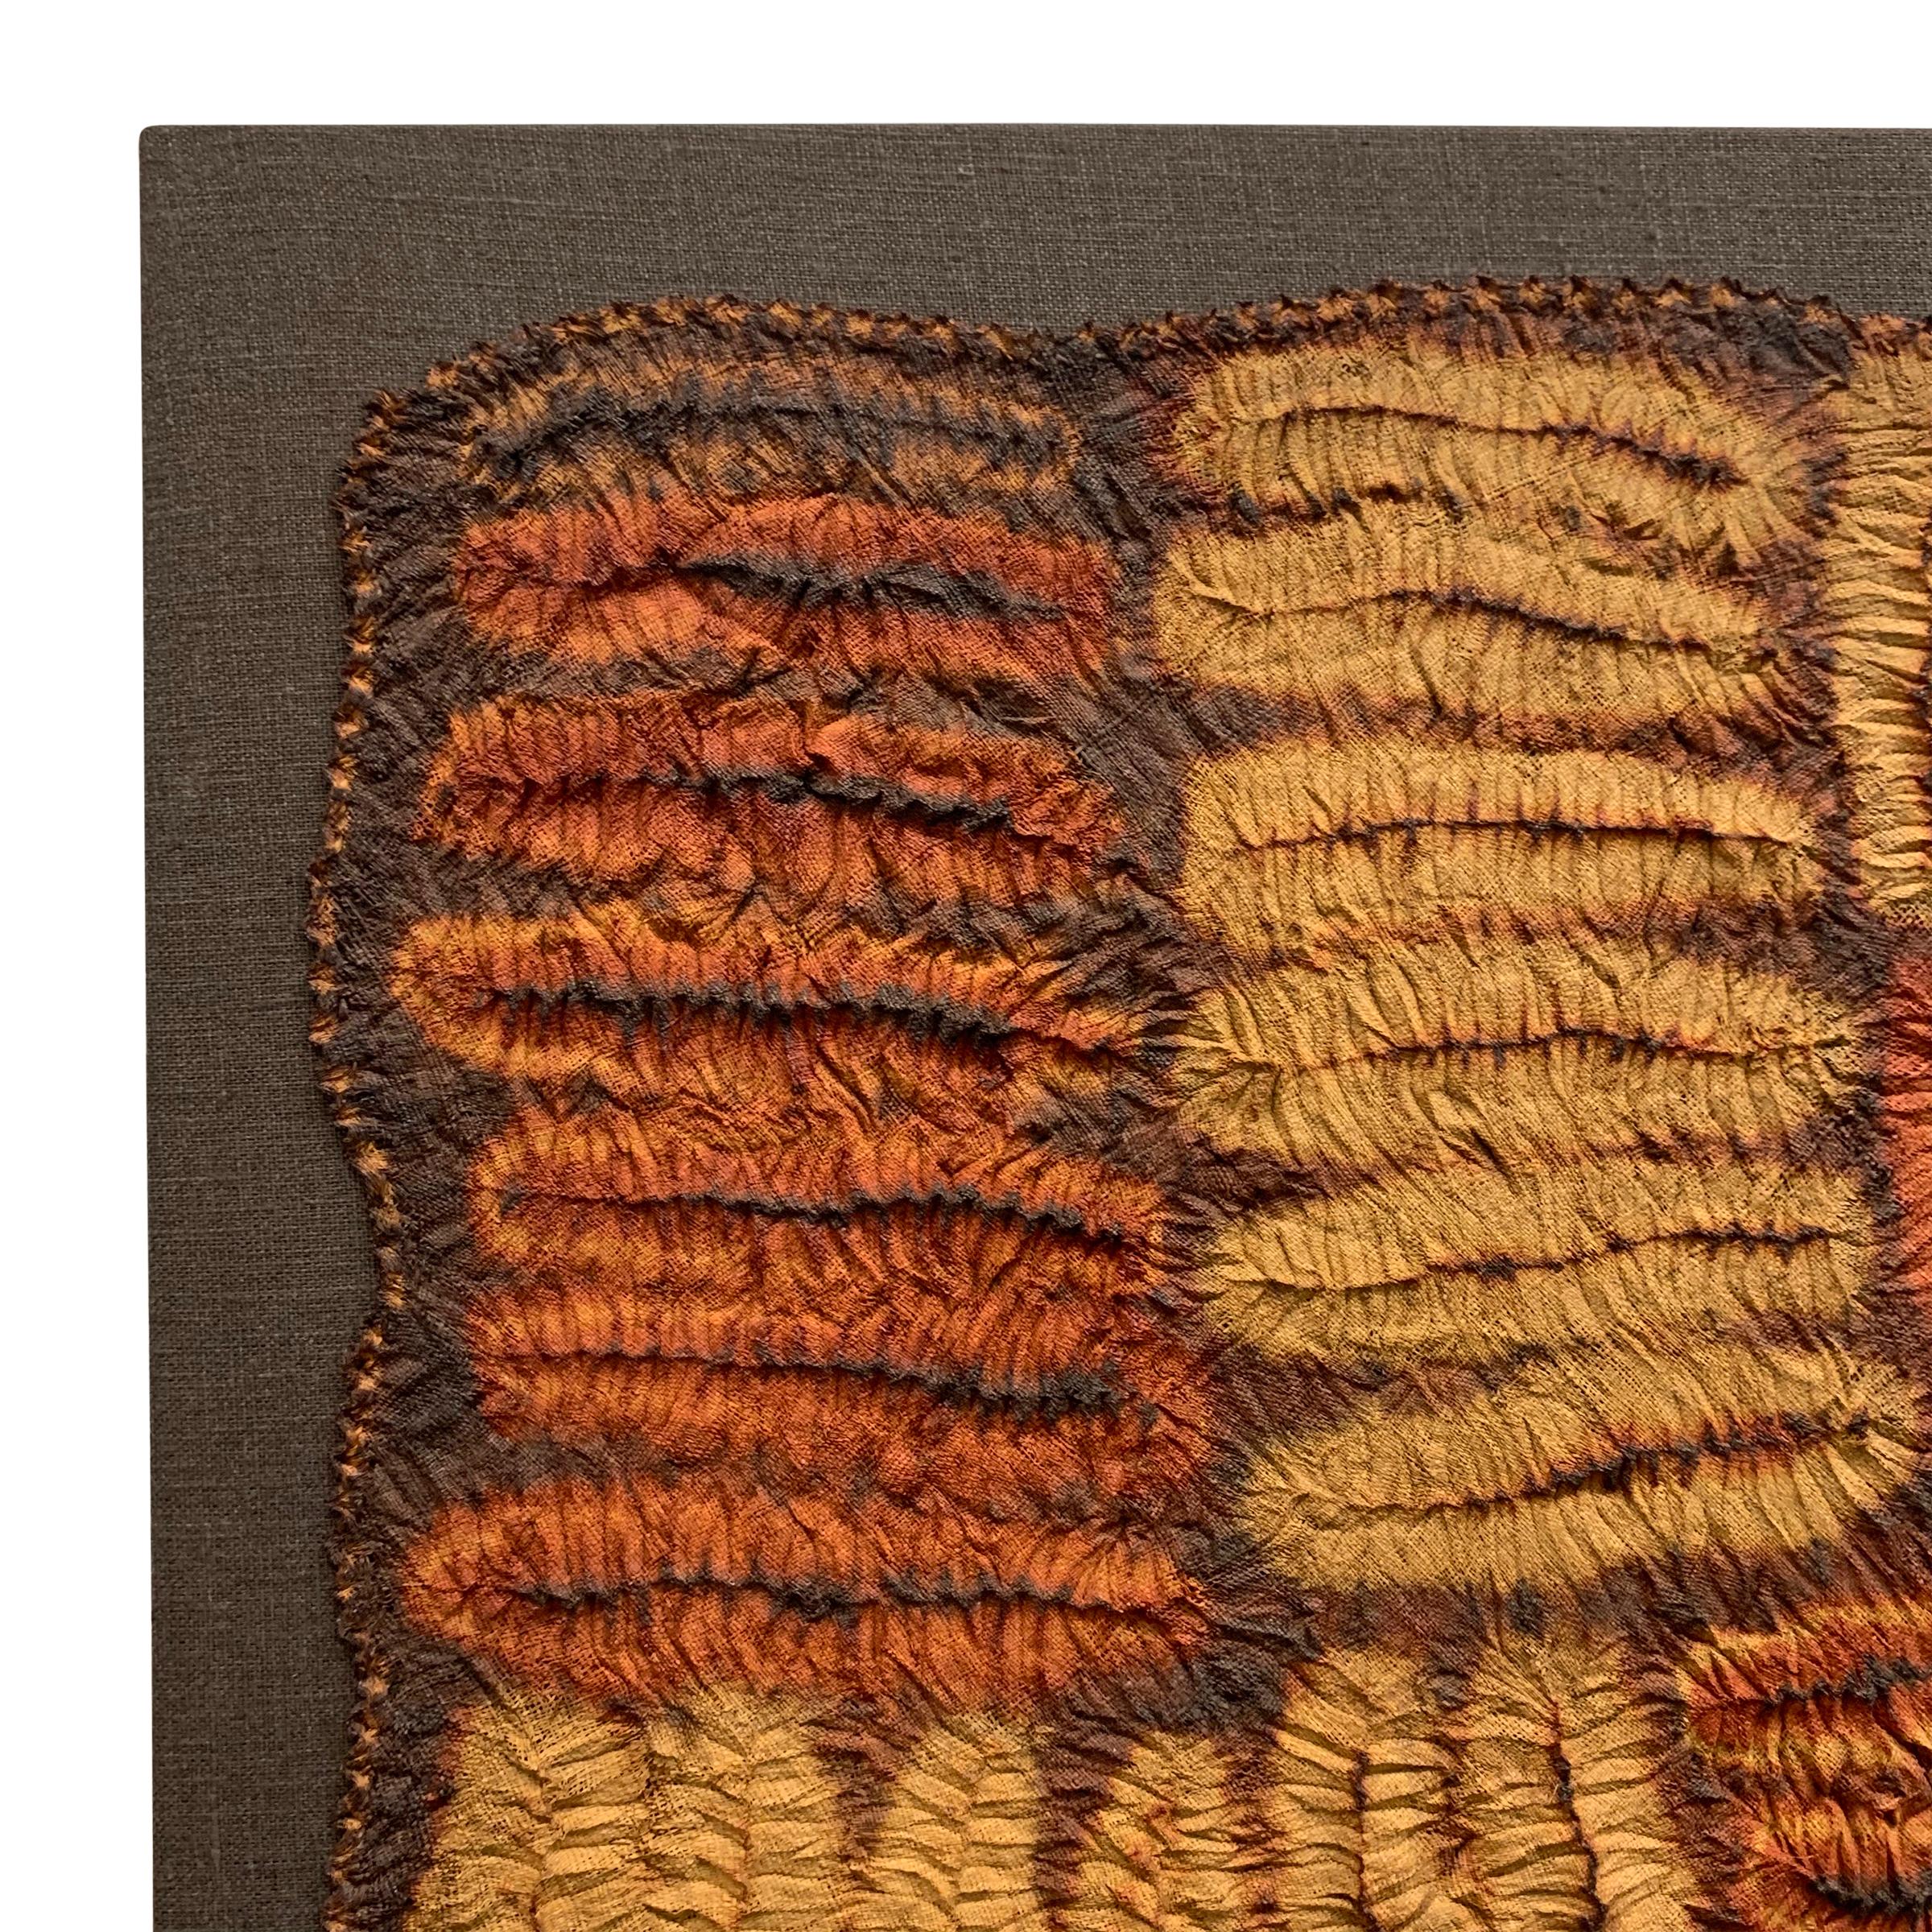 An incredible and rare mid-20th century Dida (Ivory Coast) hand-plated Shibori tie-dyed raffia ceremonial kerchief mounted on a linen stretched frame. This kerchief was not woven on a loom, but rather completely by hand creating a totally random